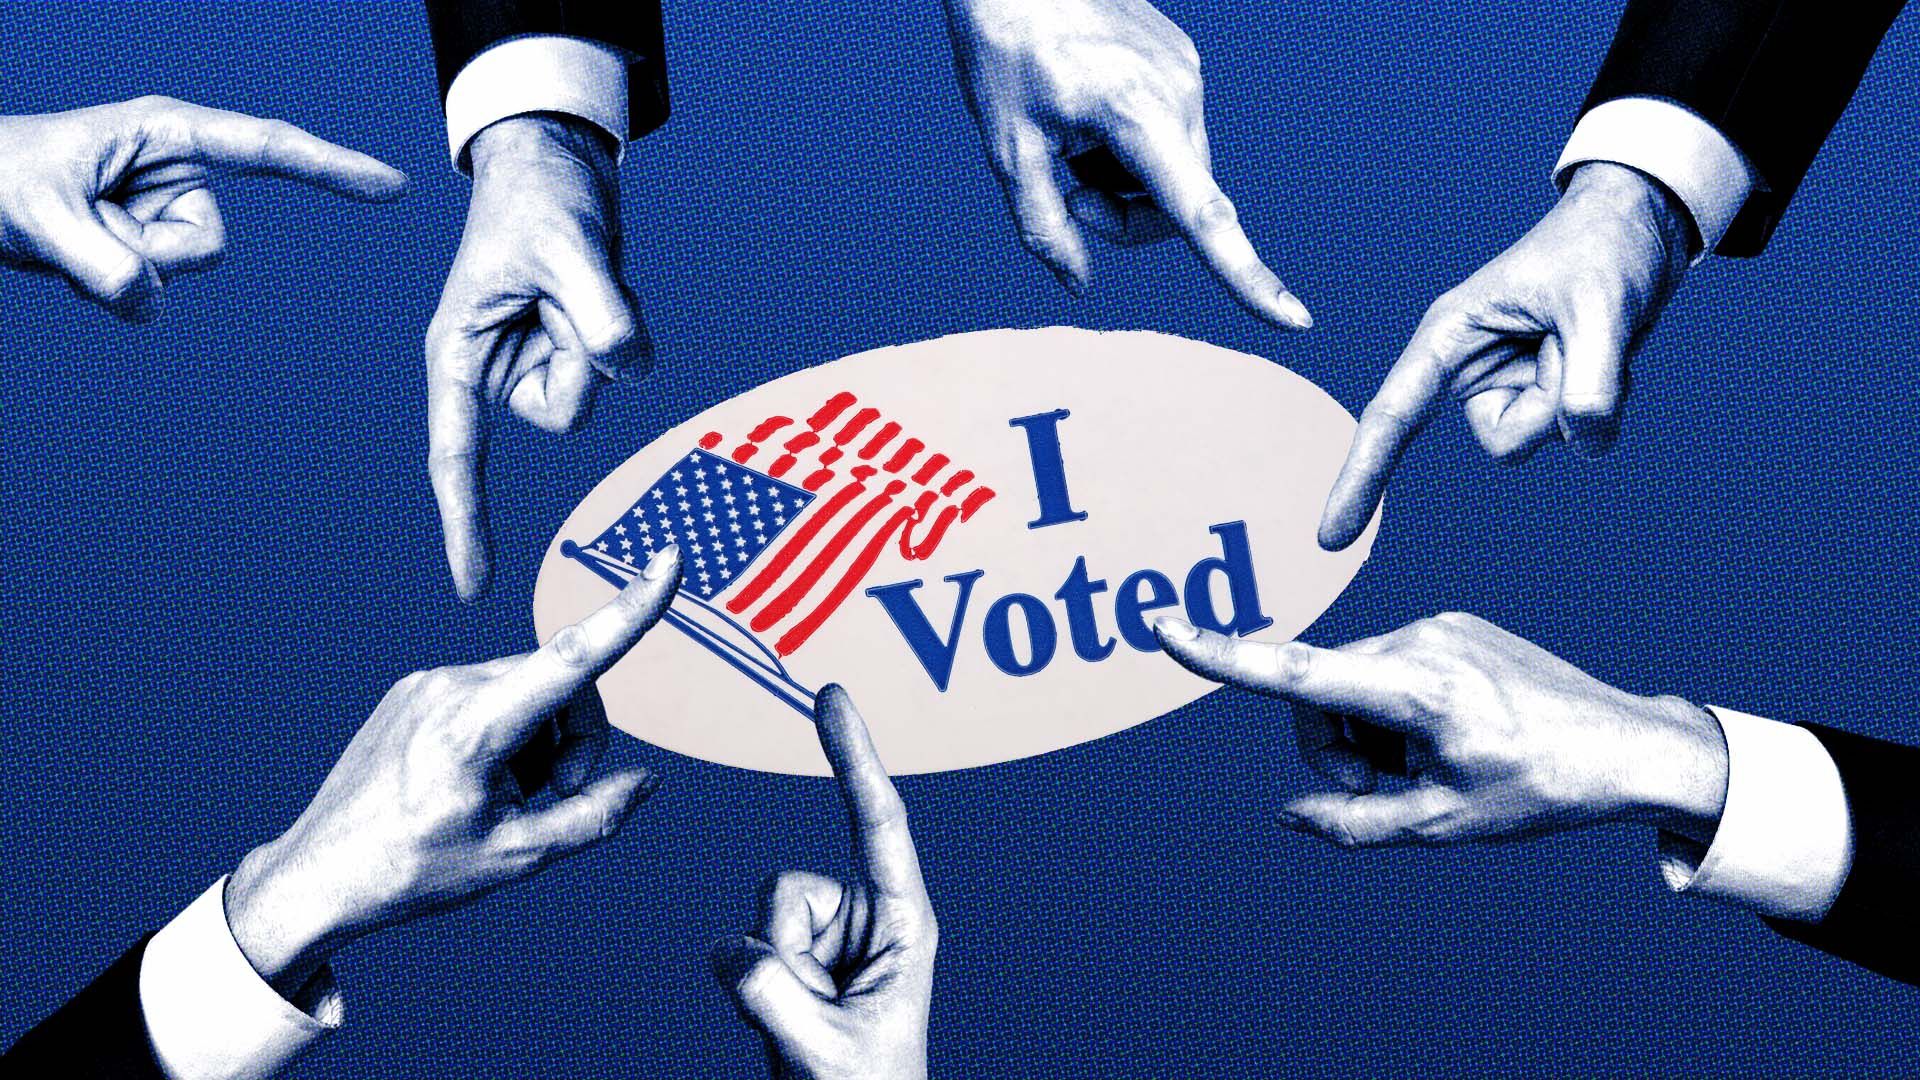 Illustration of an I voted sticker surrounded by fingers pointing in different directions